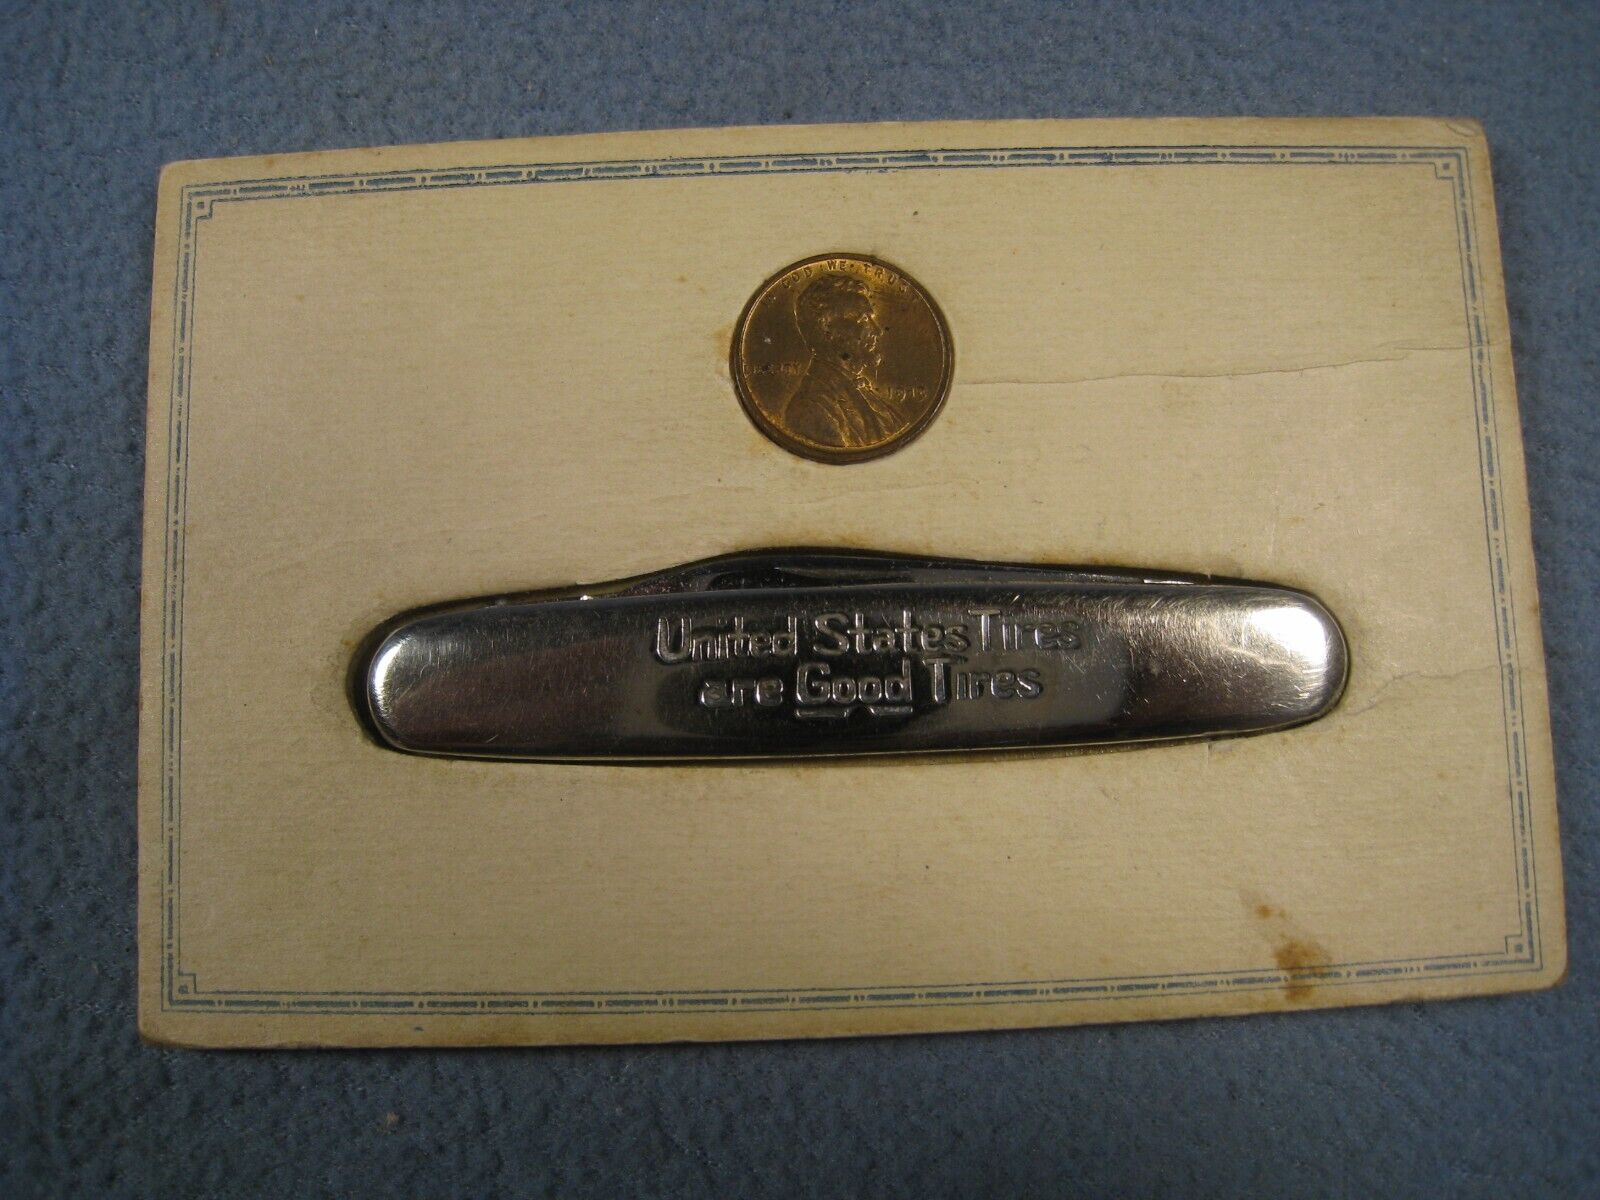 Rare Old United States Tires Valley Forge 2 Blade Knife on Card with 1919 Penny